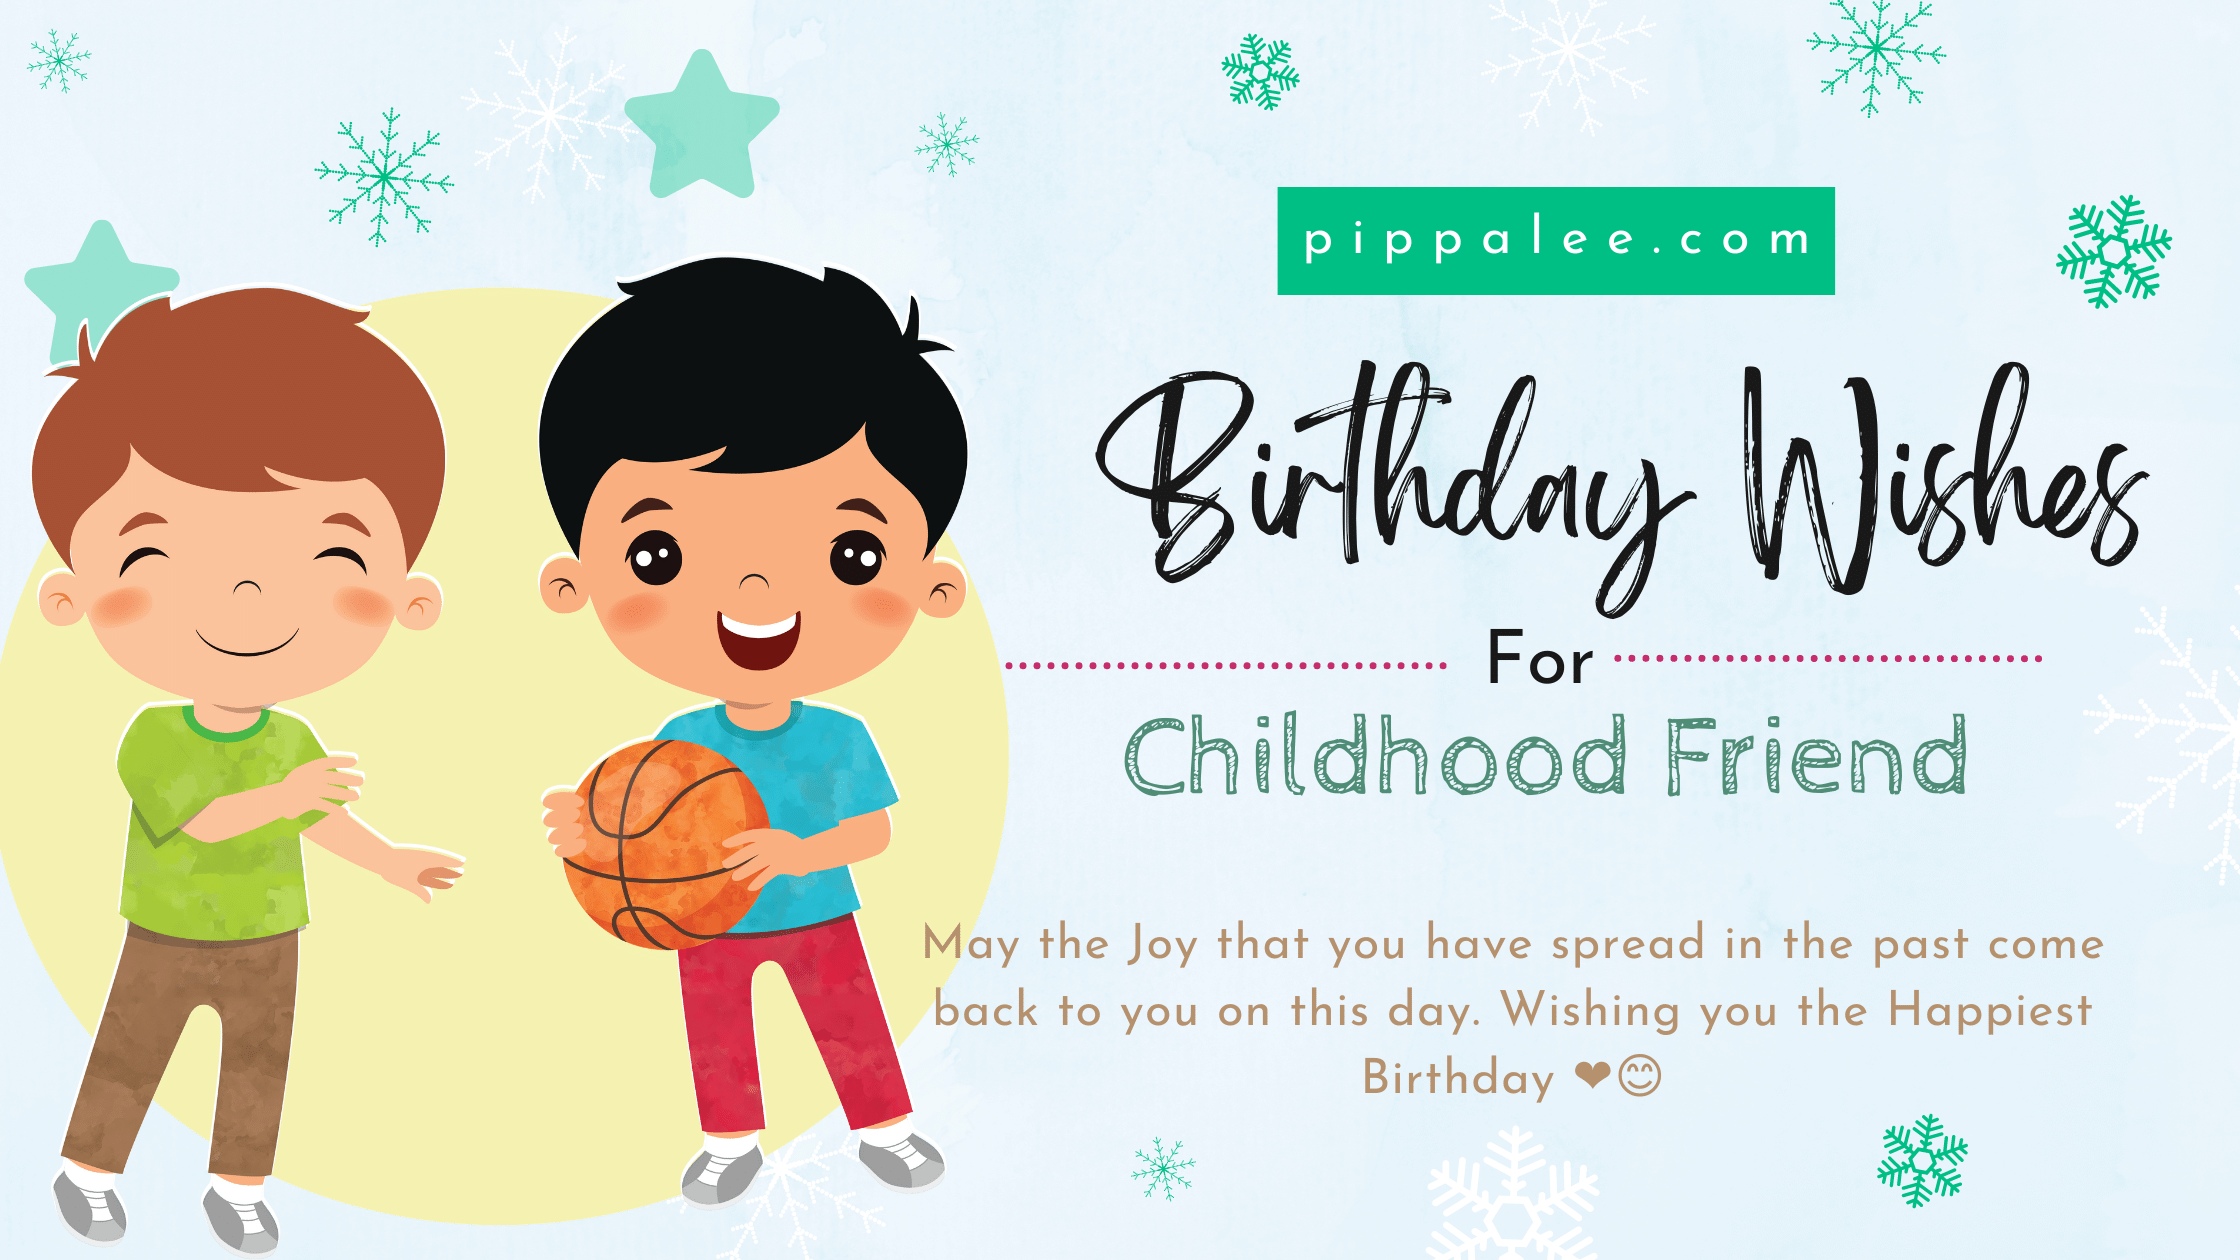 Birthday Wishes For Childhood Friend - Wishes & Messages